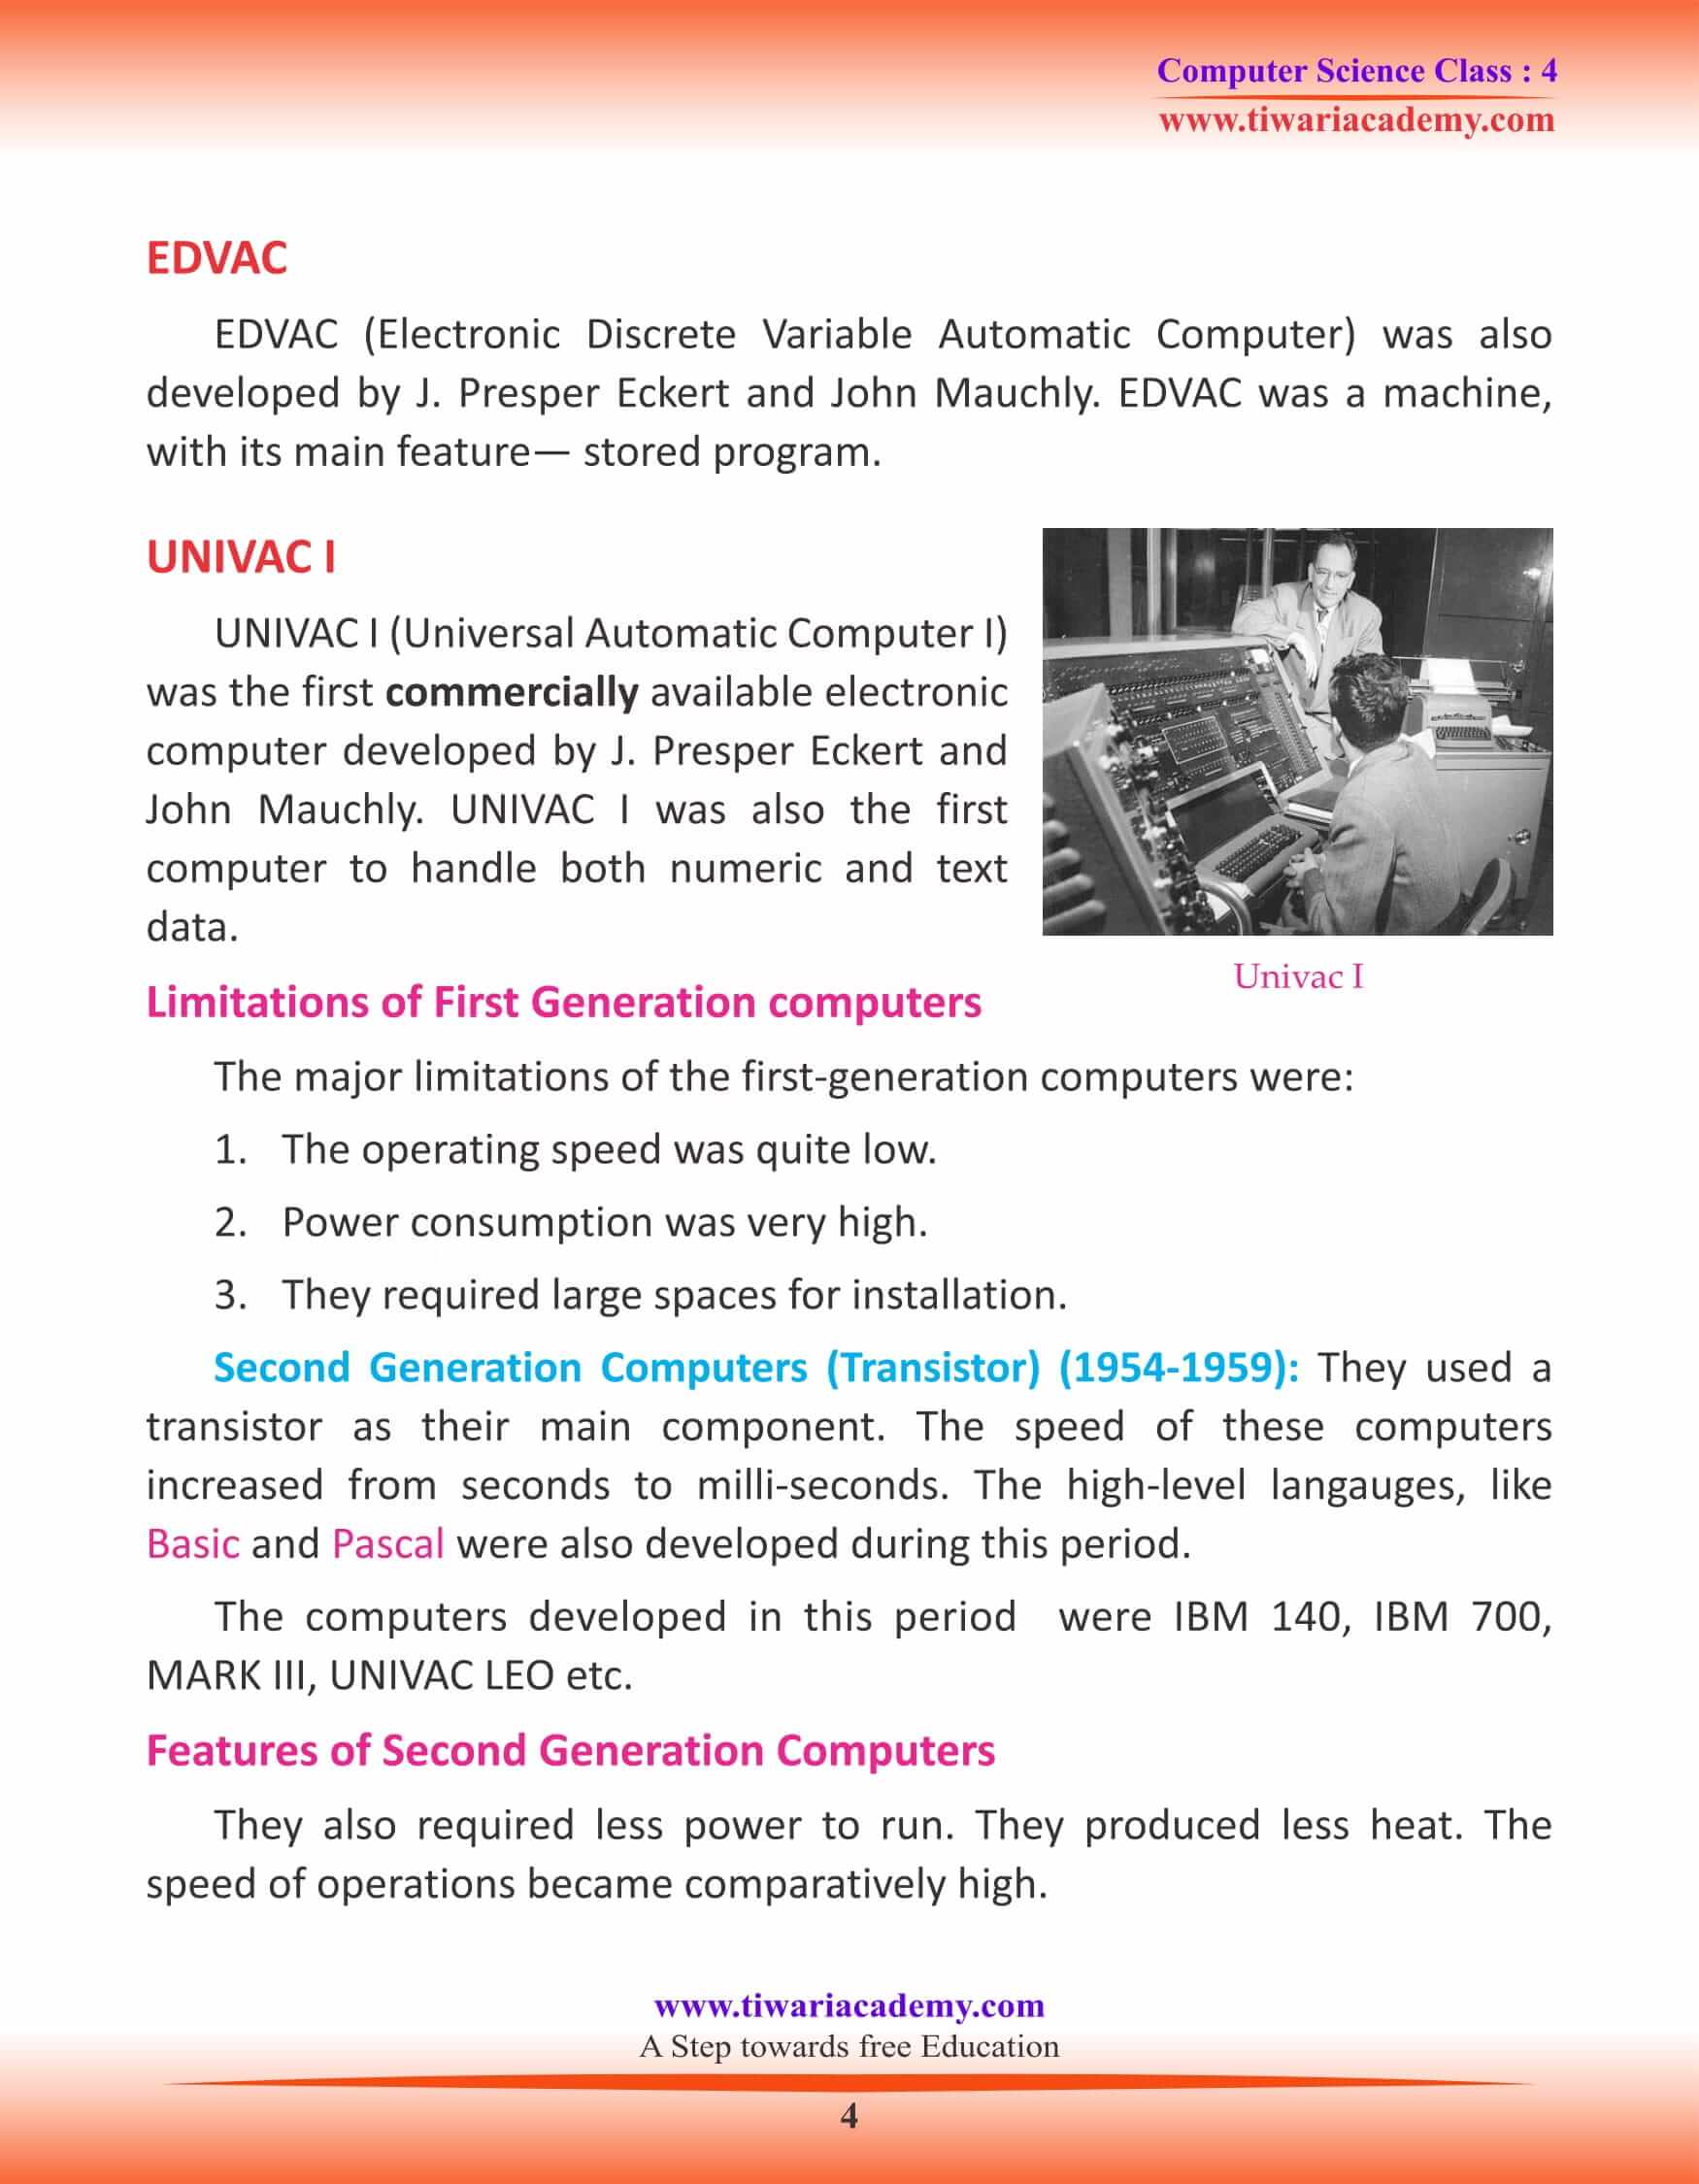 Class 4 Computer Science Chapter 1 Study Material